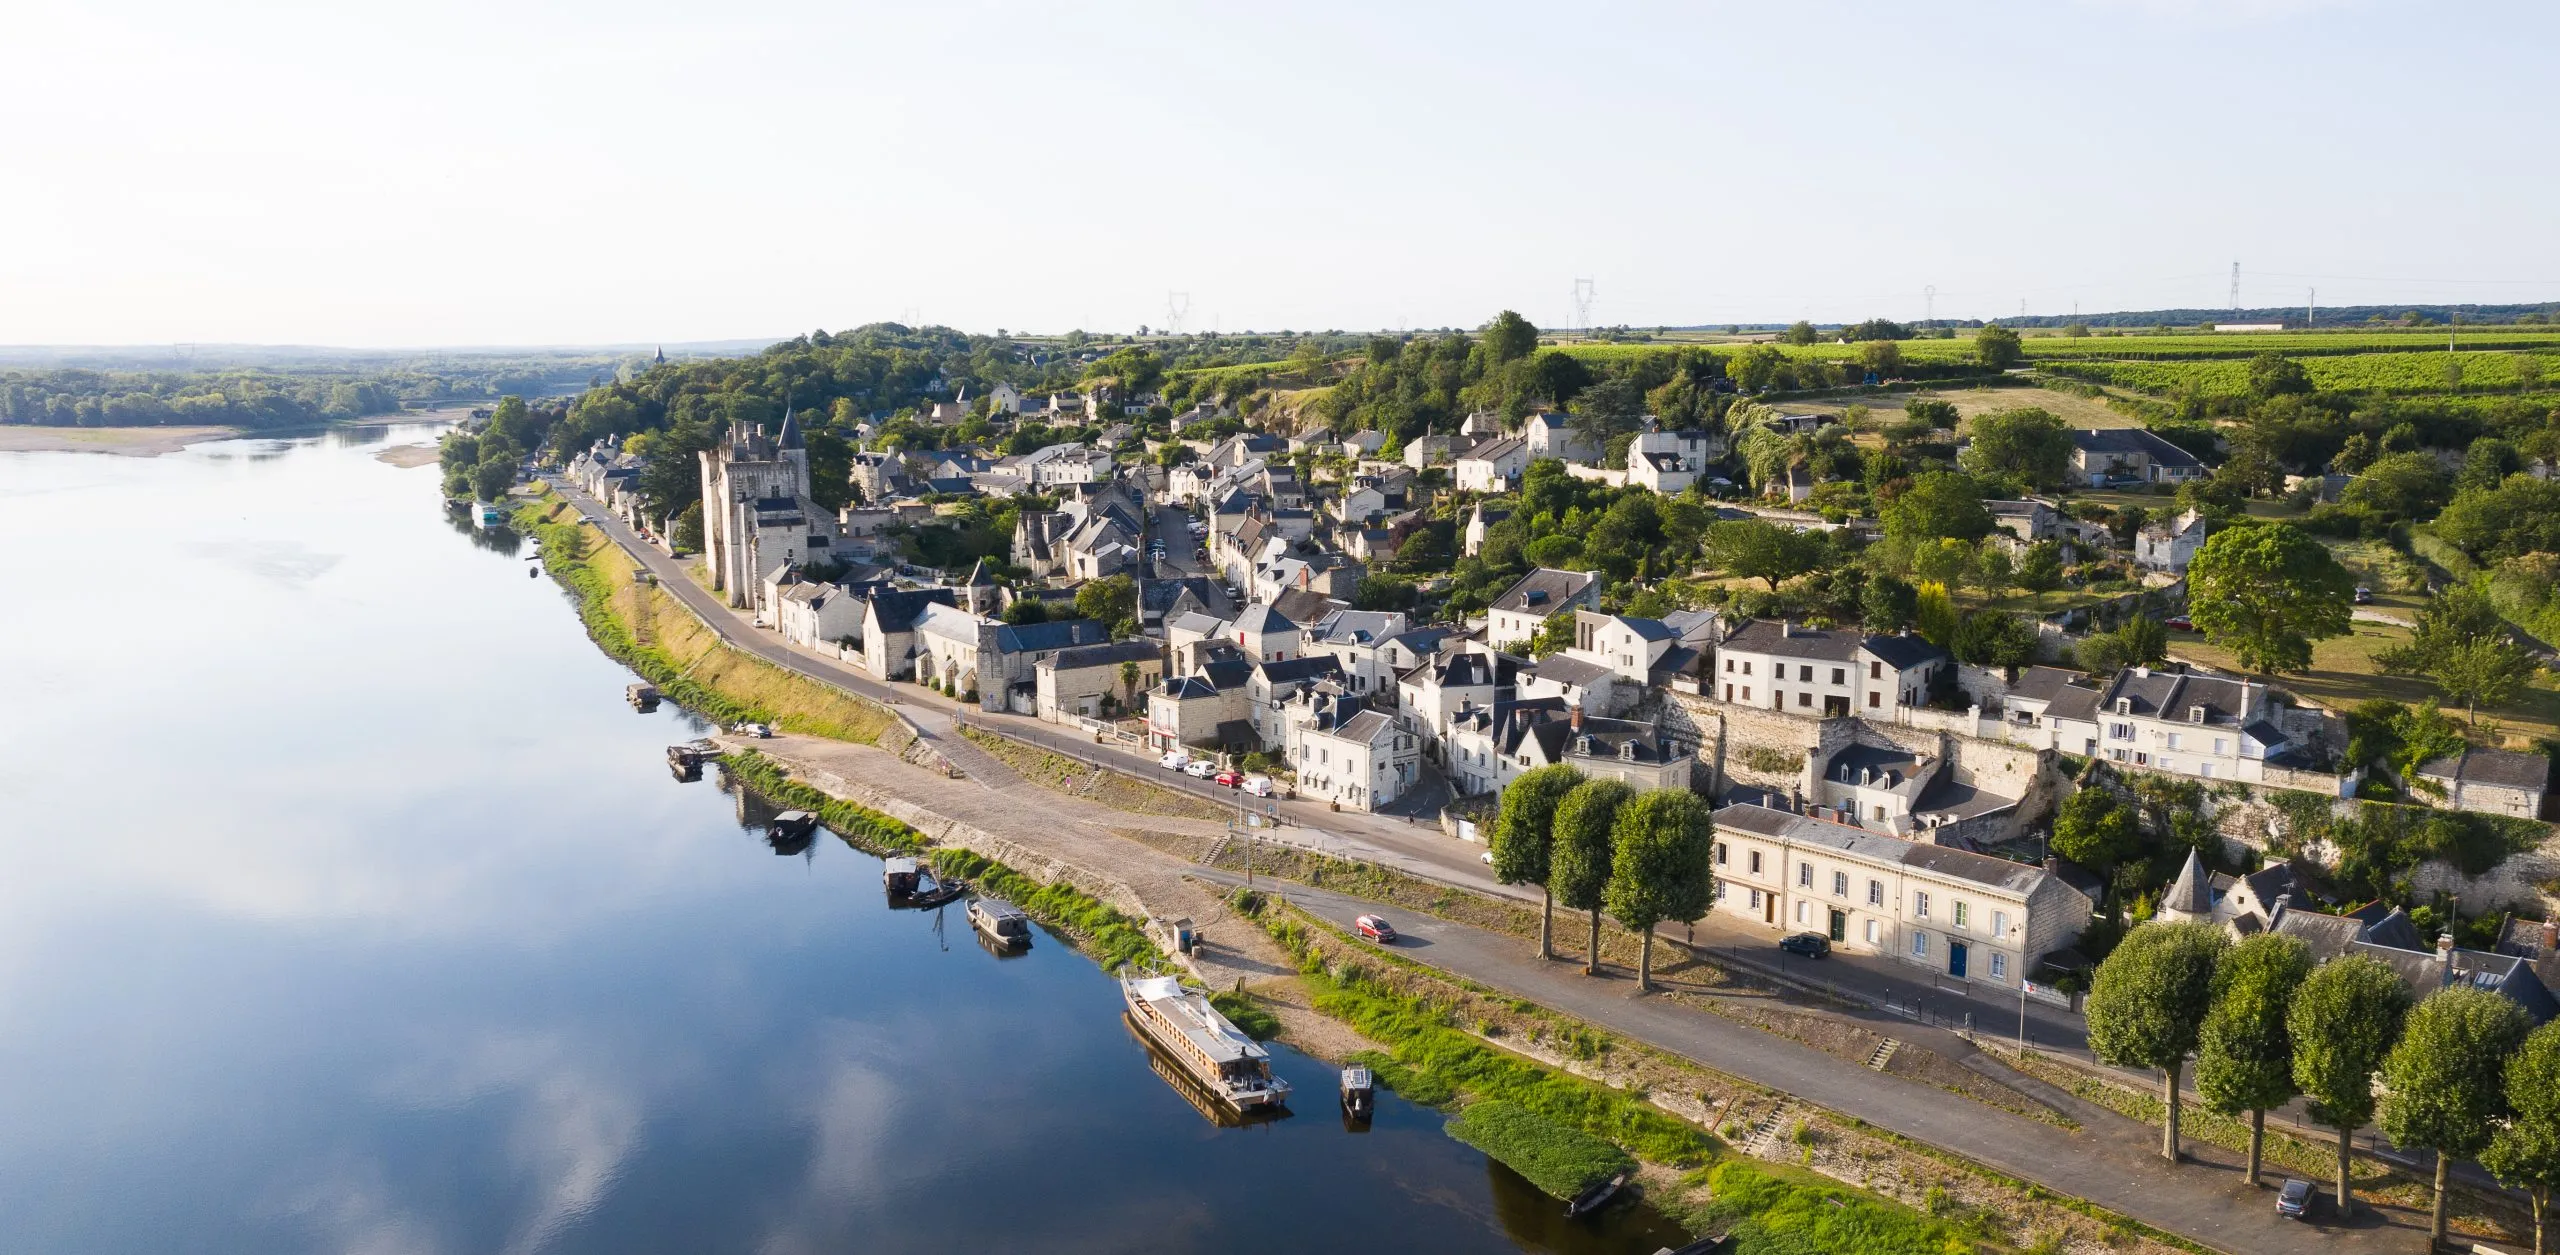 Drone view of the village of Montsoreau, on the Loire River